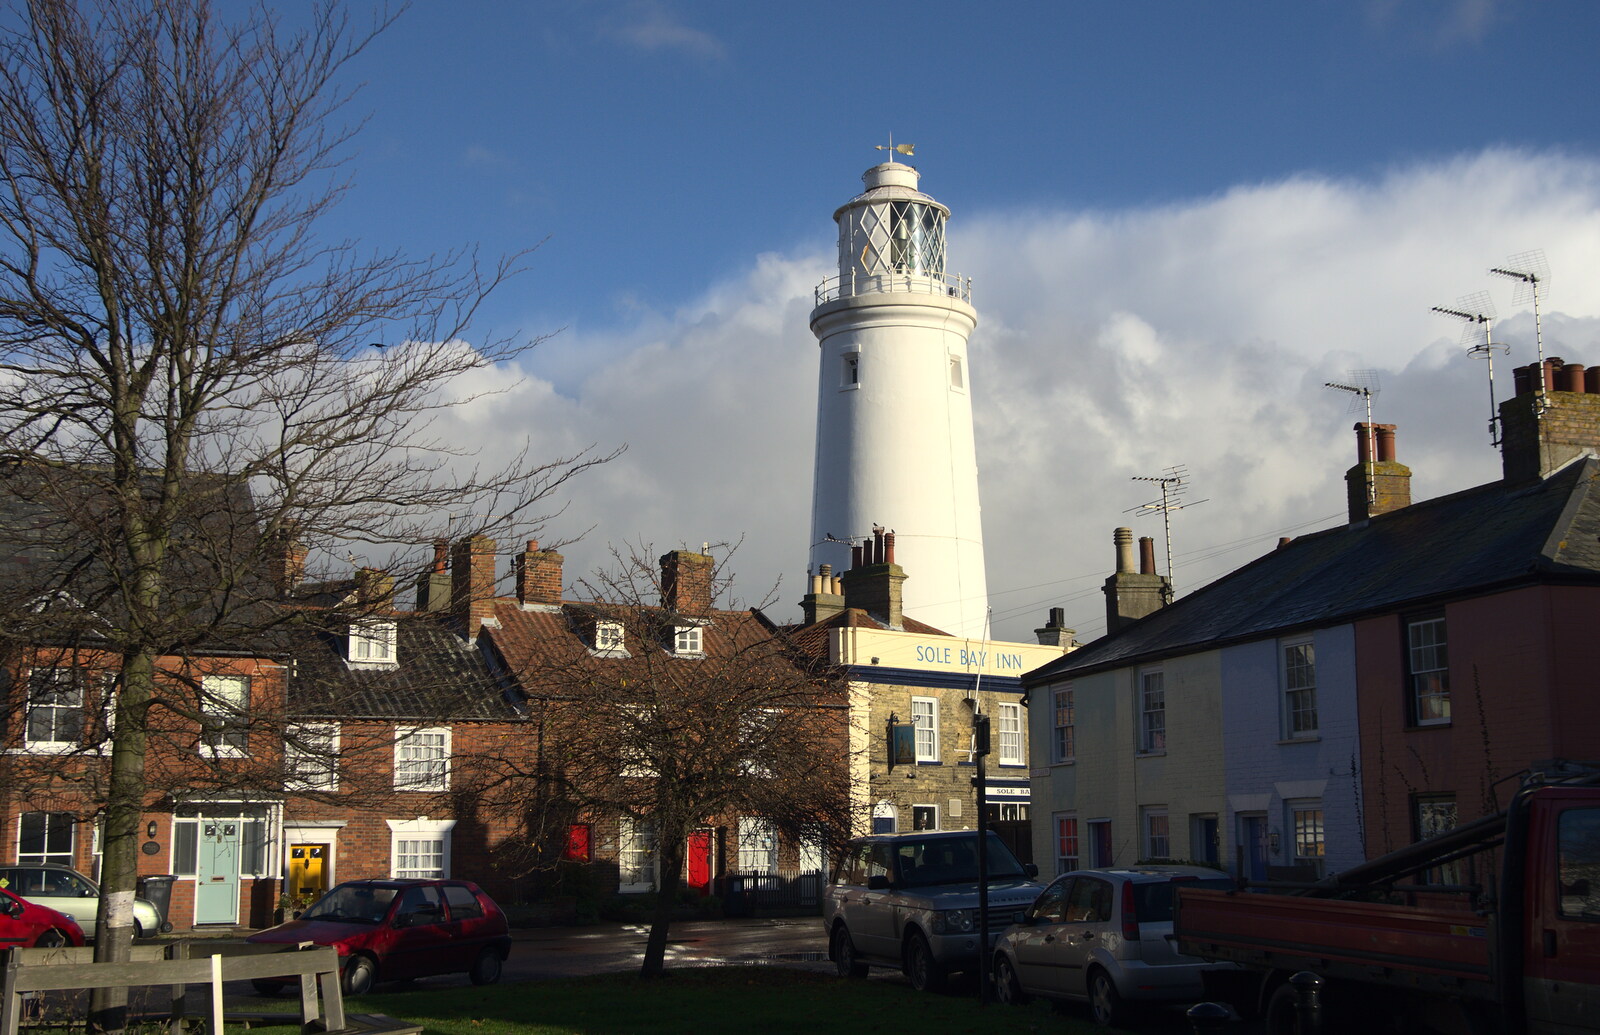 Southwold lighthouse and the Sole Bay Inn from Apple's Adnams Brewery Birthday Tour, Southwold, Suffolk - 29th November 2012